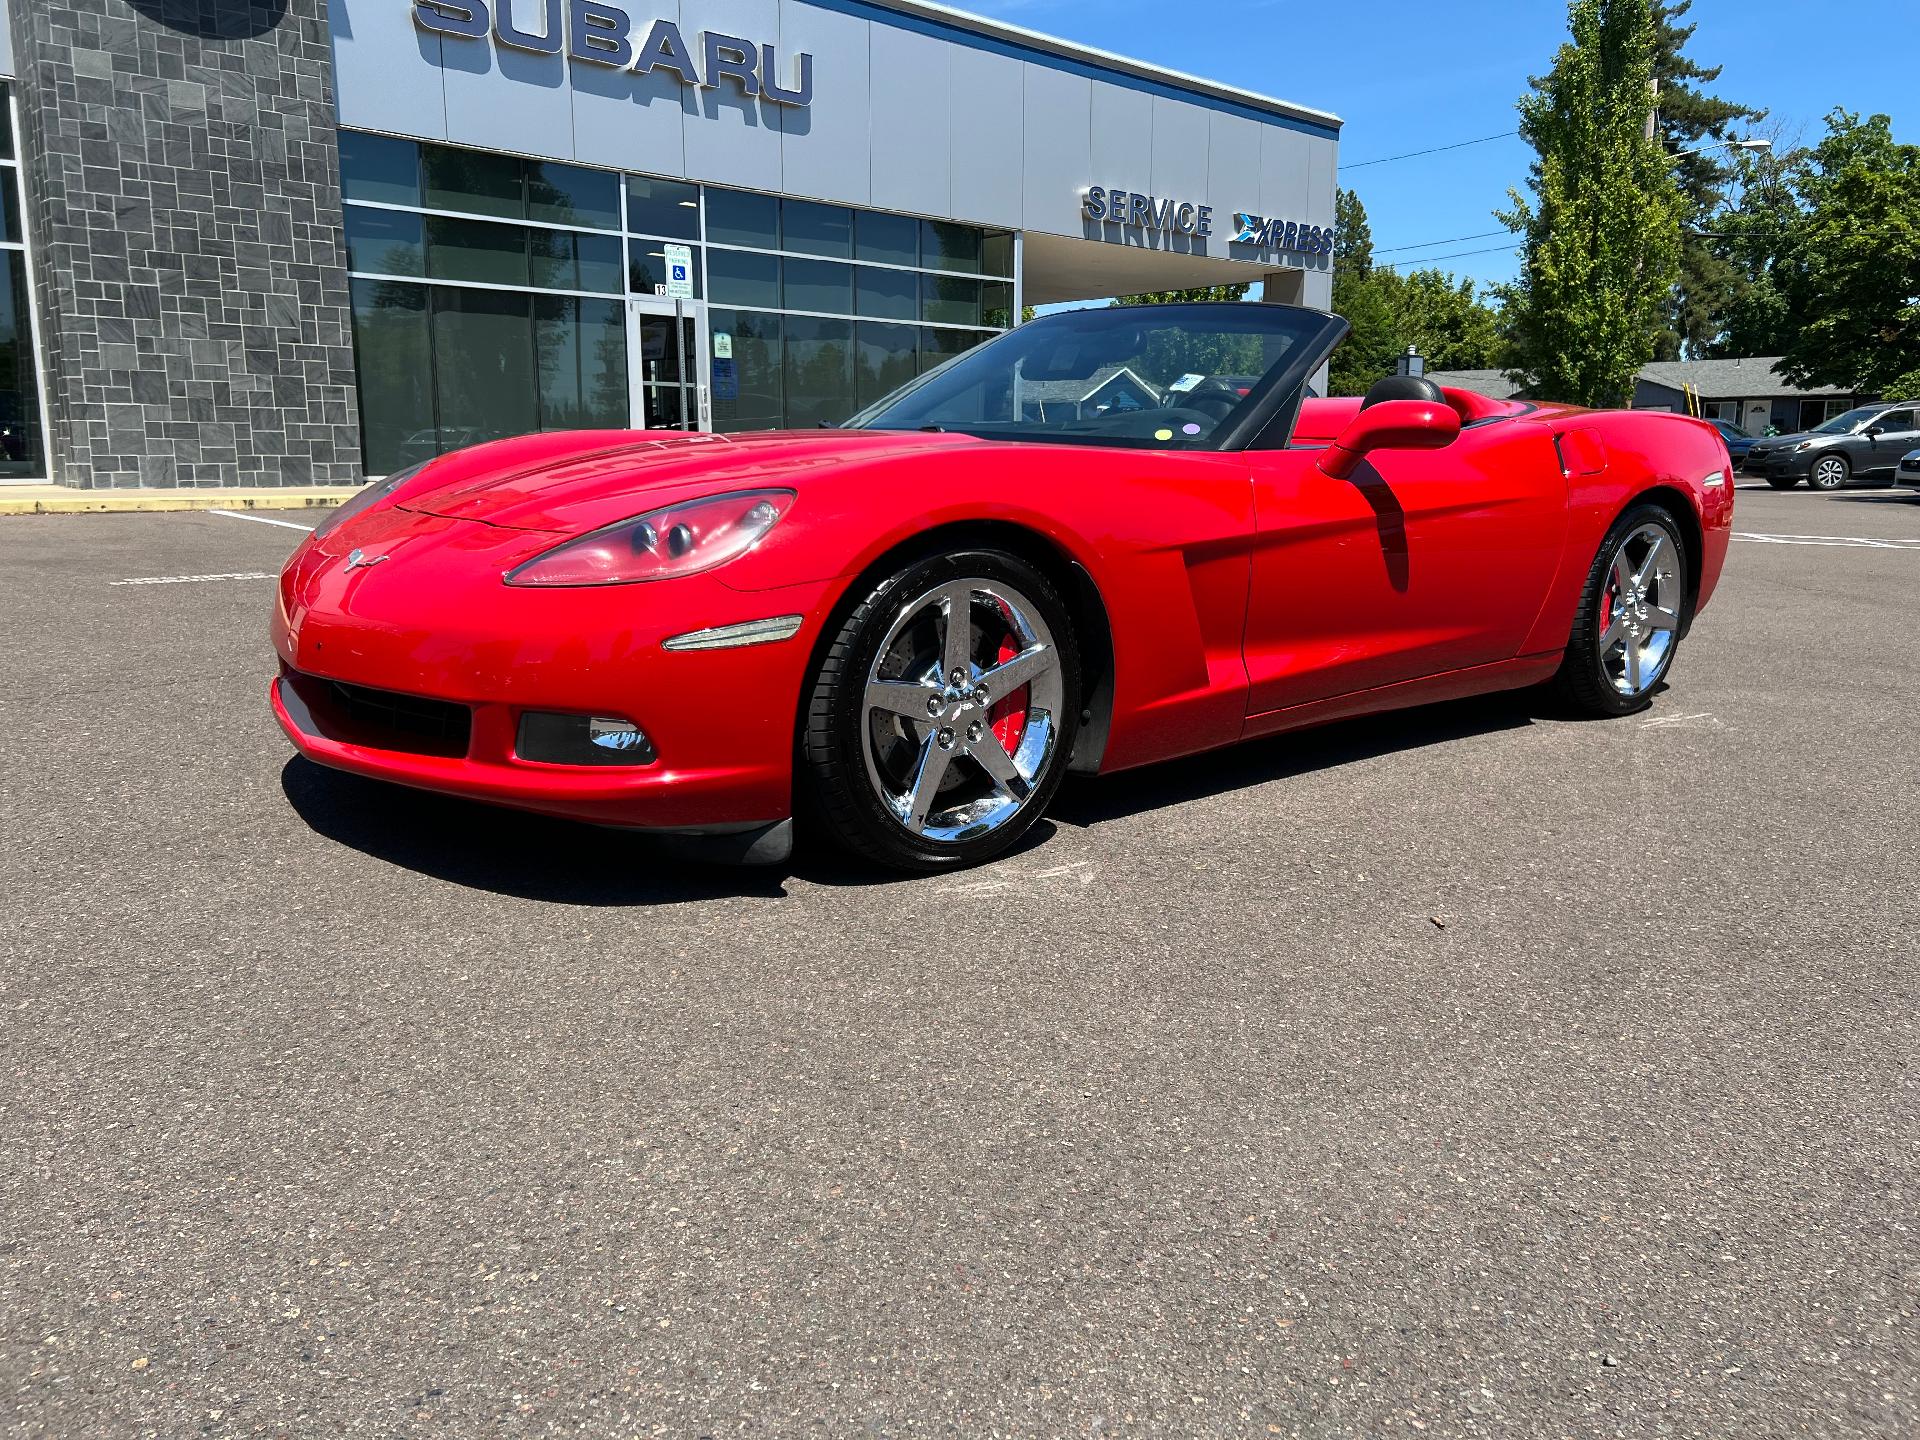 Used 2005 Chevrolet Corvette Base with VIN 1G1YY34U255137258 for sale in Mcminnville, OR